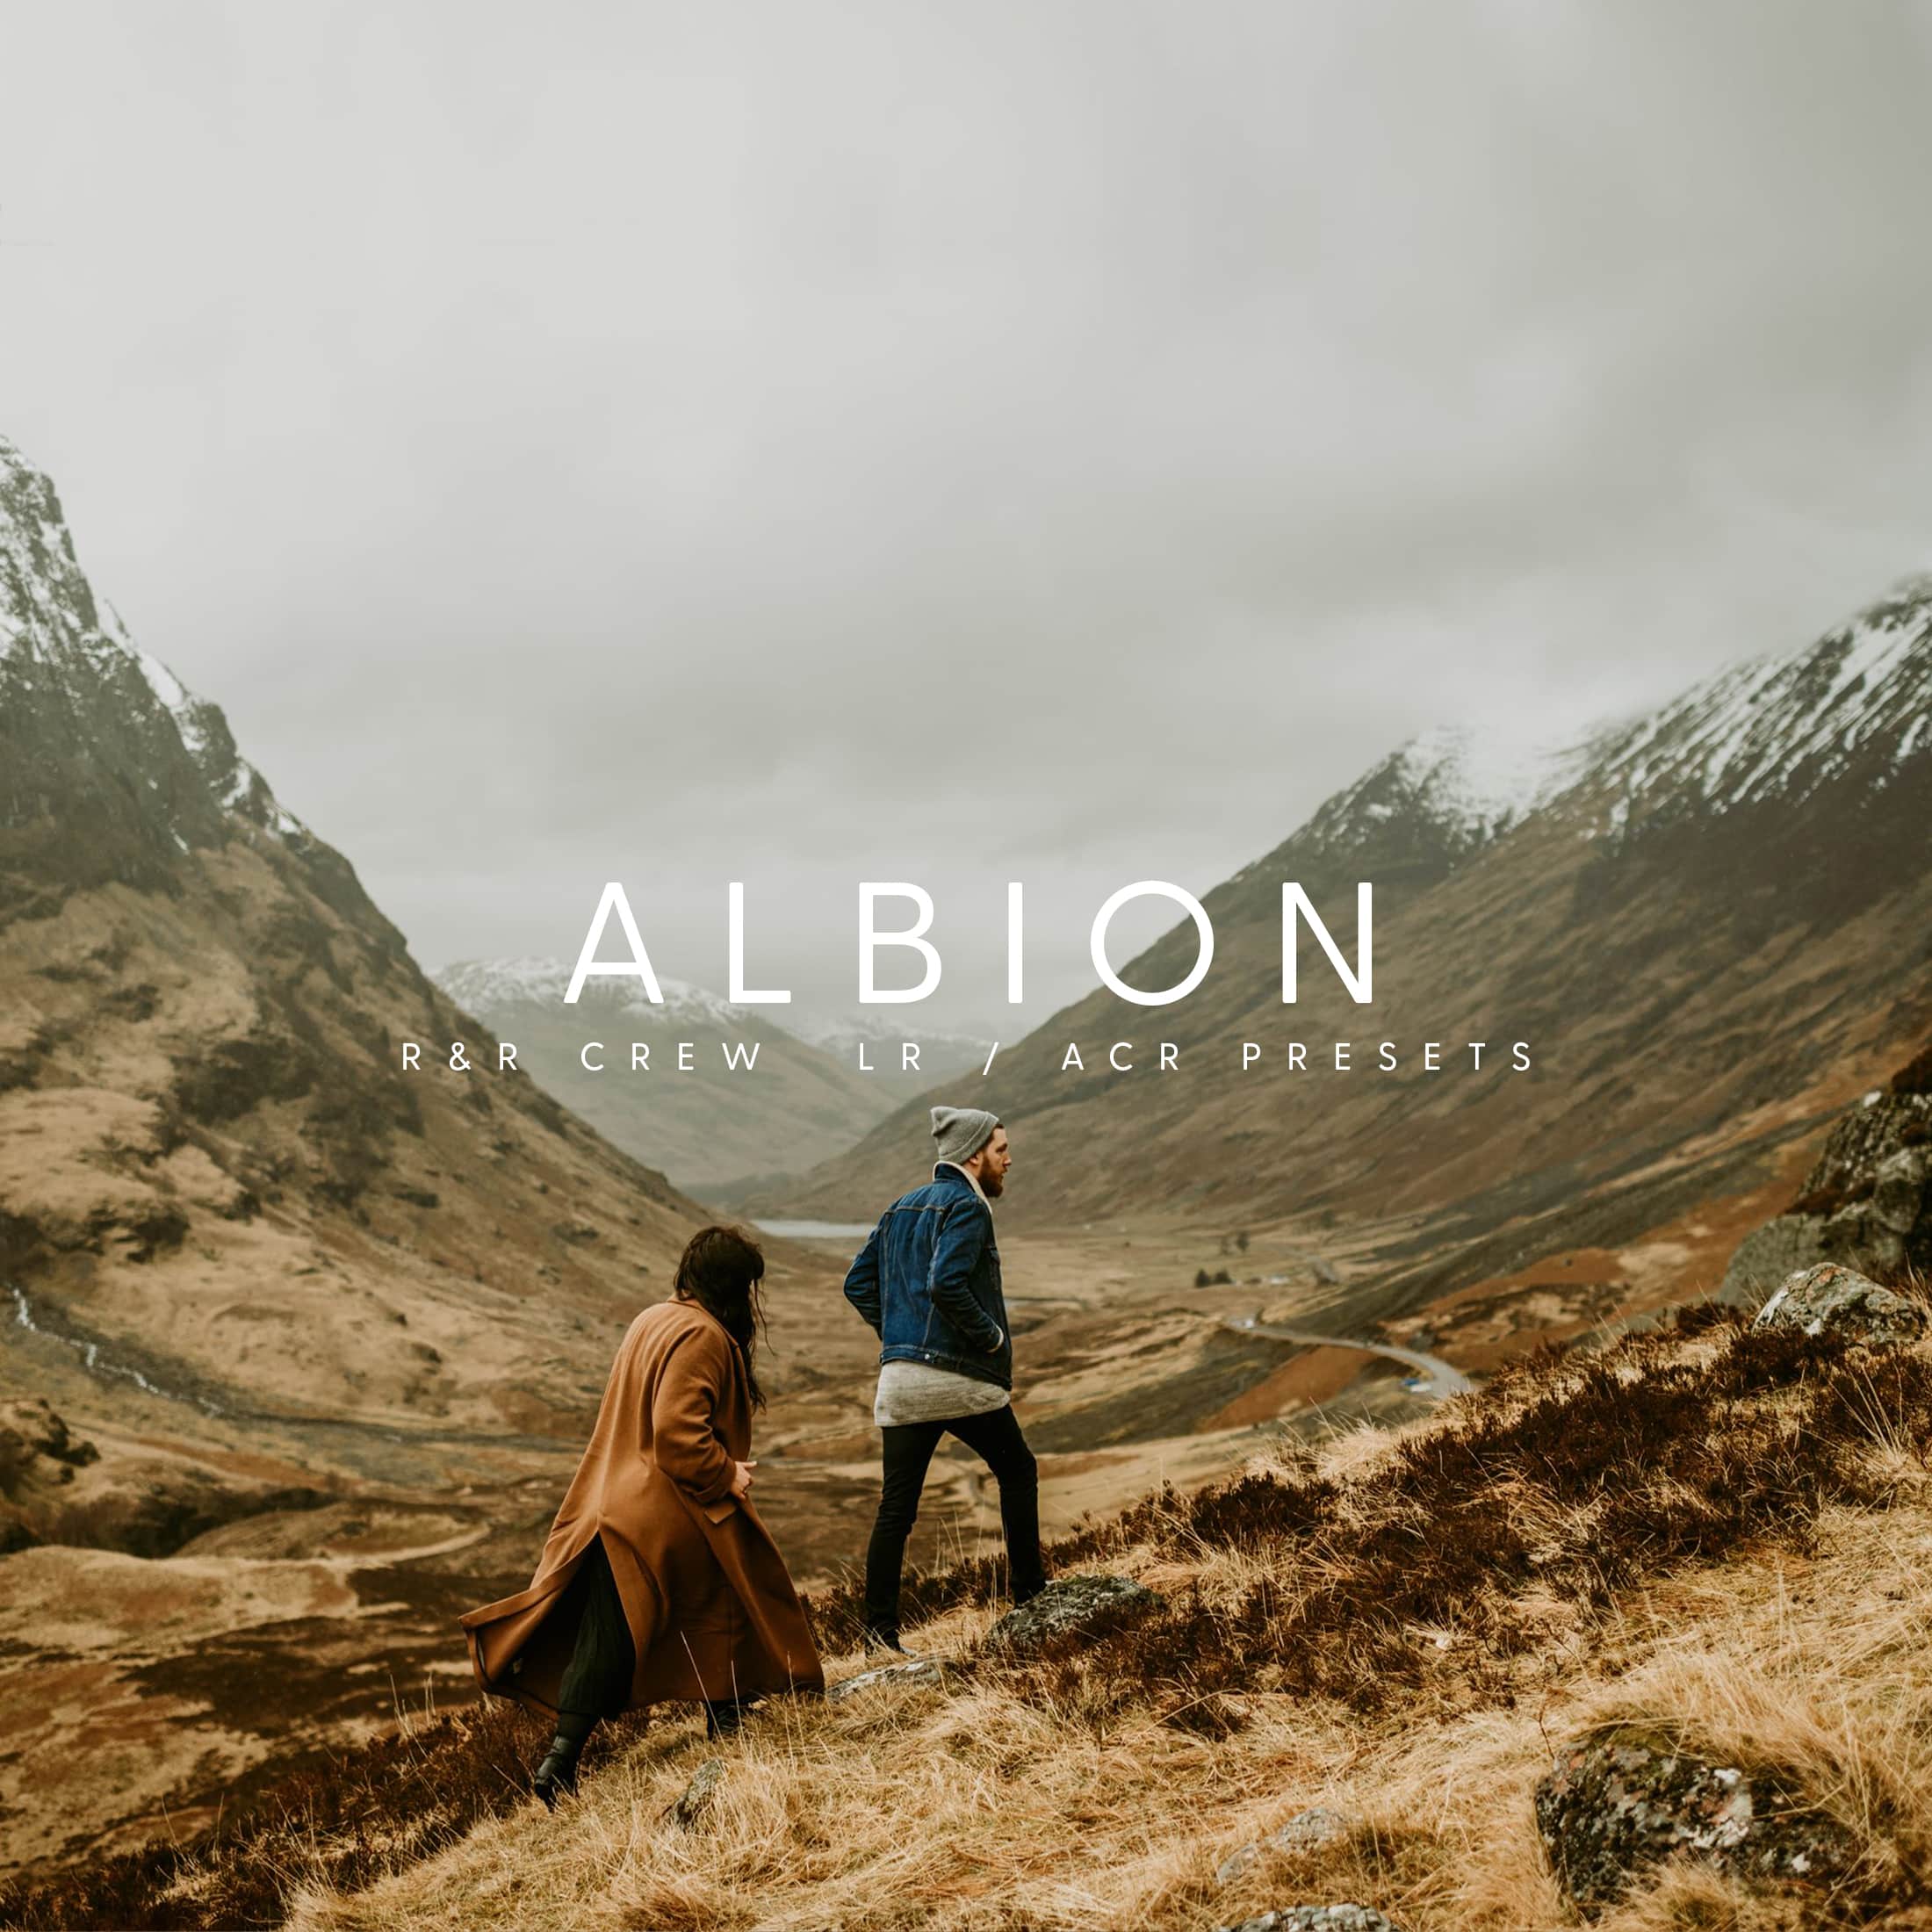 Rooke & Rover Crew ALBION LR/ACR PRESETS NEW 2021 Version 1.3 Pack